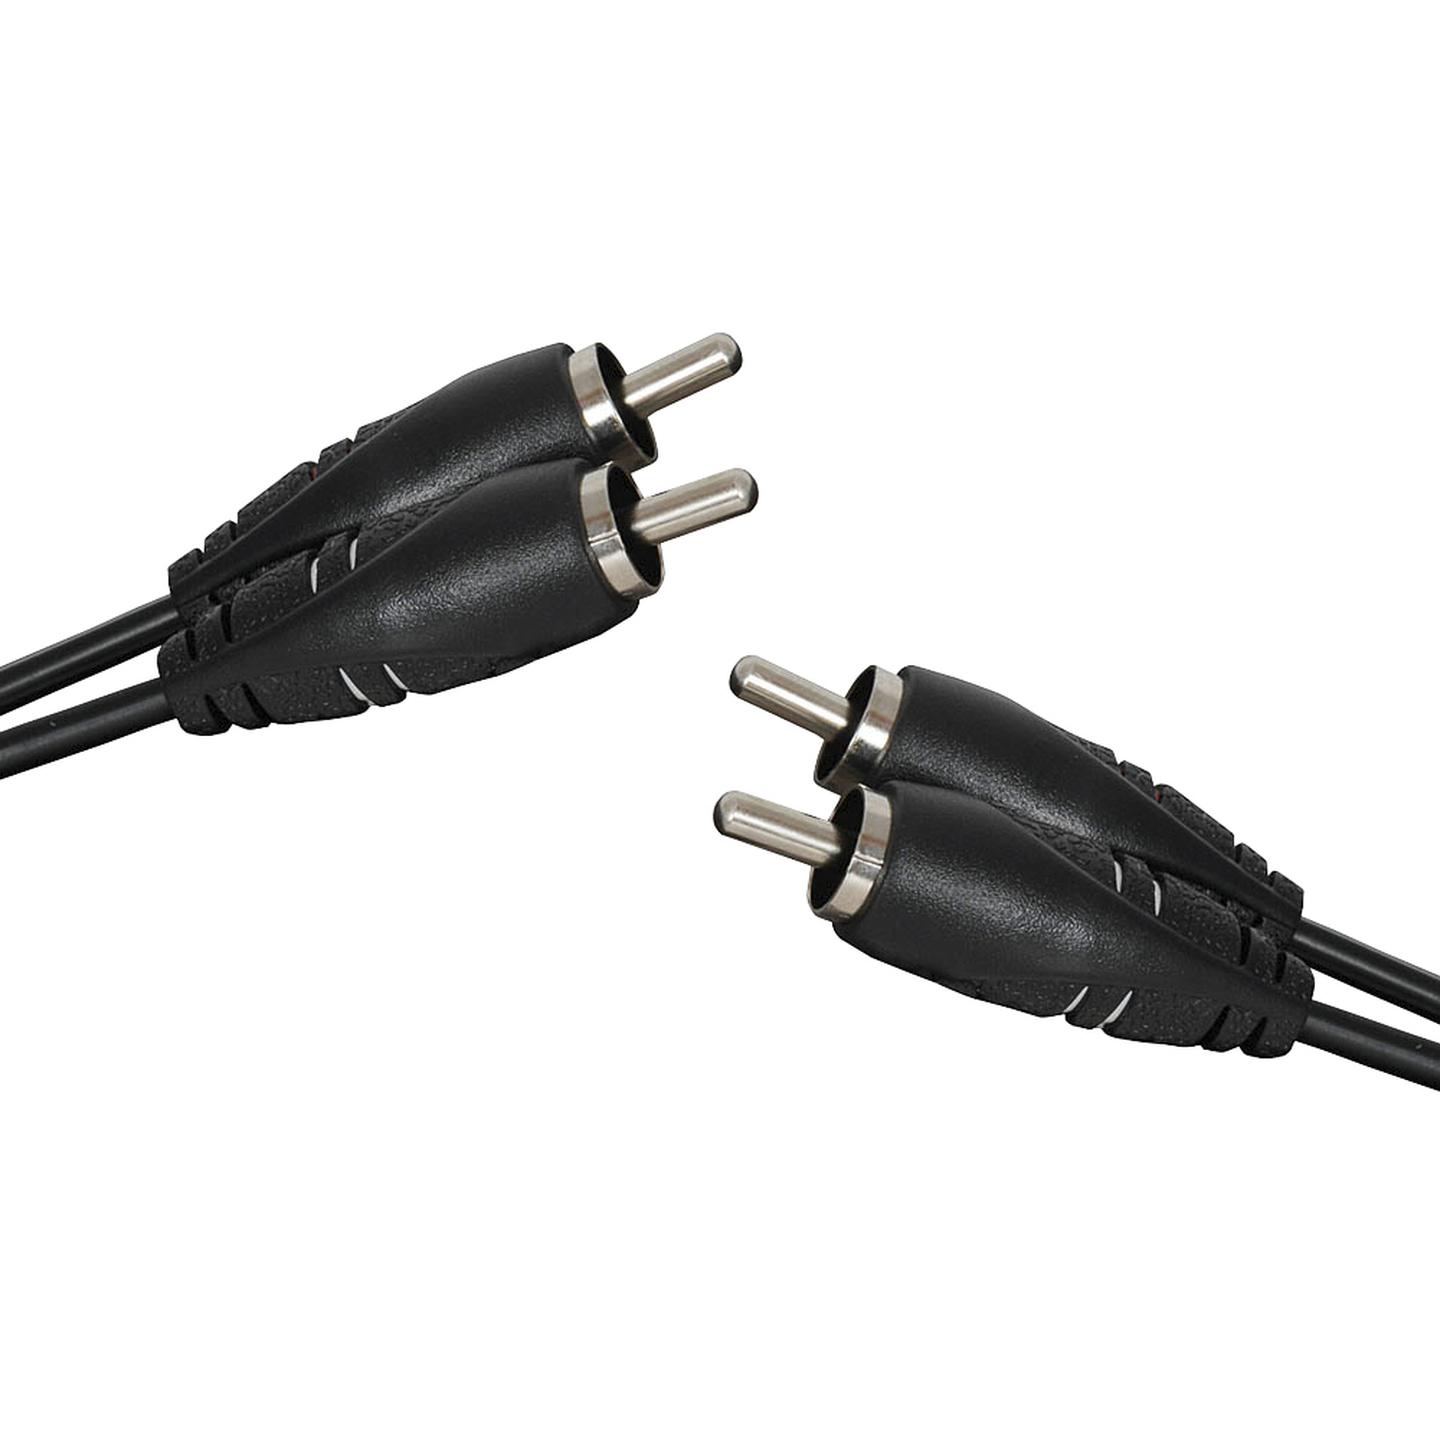 2 x RCA Plugs to 2 x RCA Plugs Audio Cable - 5m